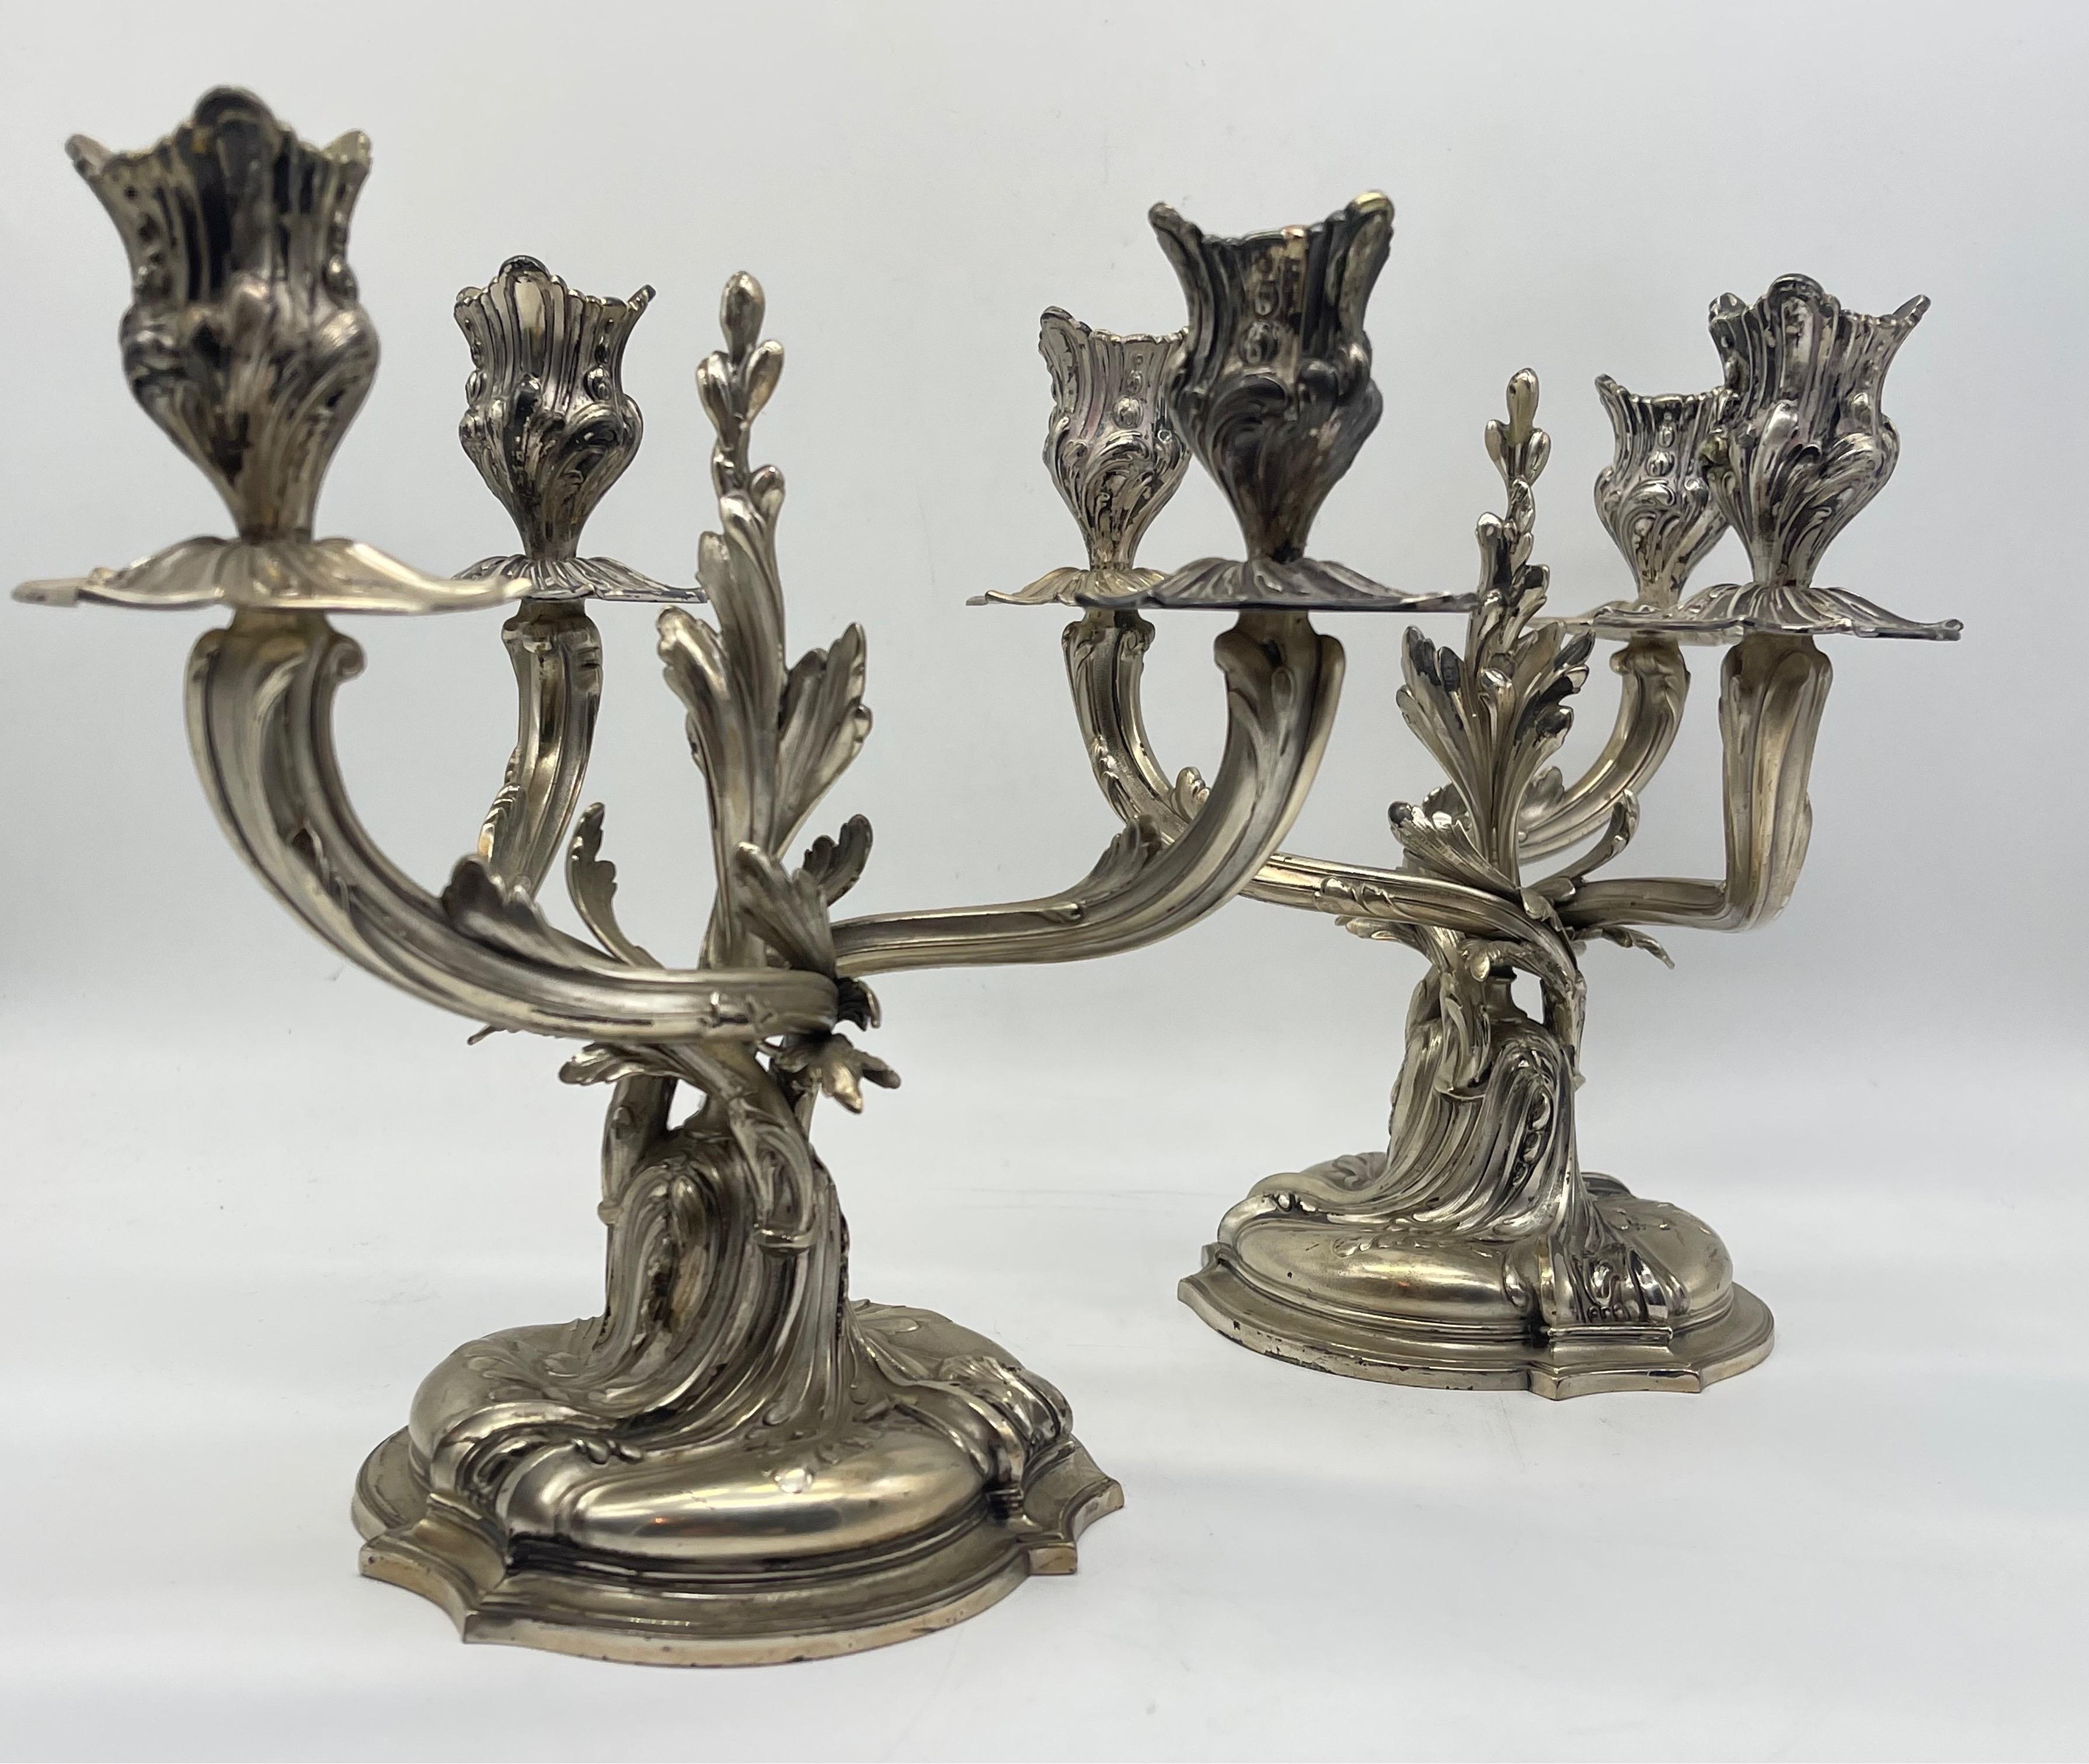 2 Antique Silver Candlesticks 3-armed 800 Germany Rococo

3-armed

Strube & Sohn 

Half moon & crown


Weight: 1179 grams

The condition can be seen in the pictures.